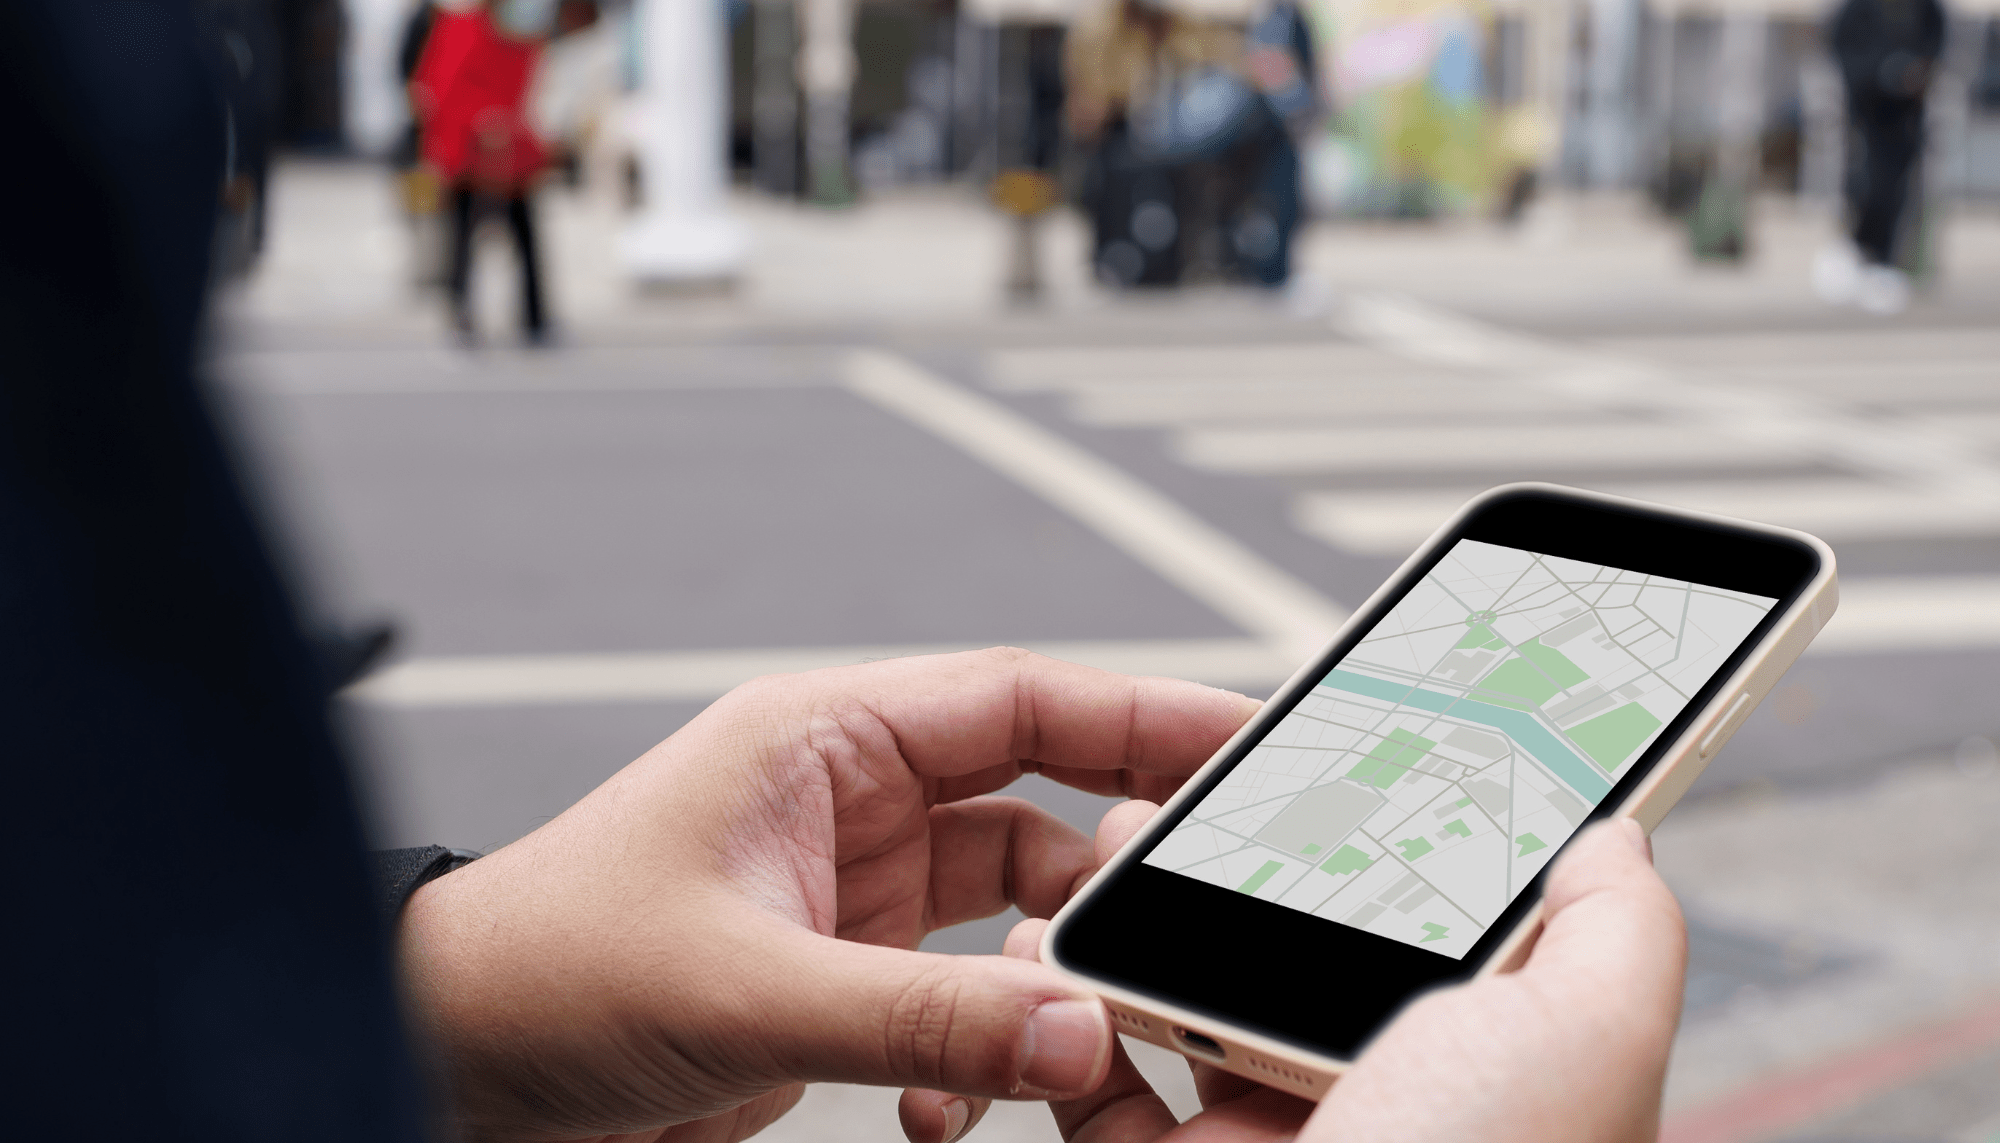 person standing on street corner looking at phone with map app open; only hands are visible